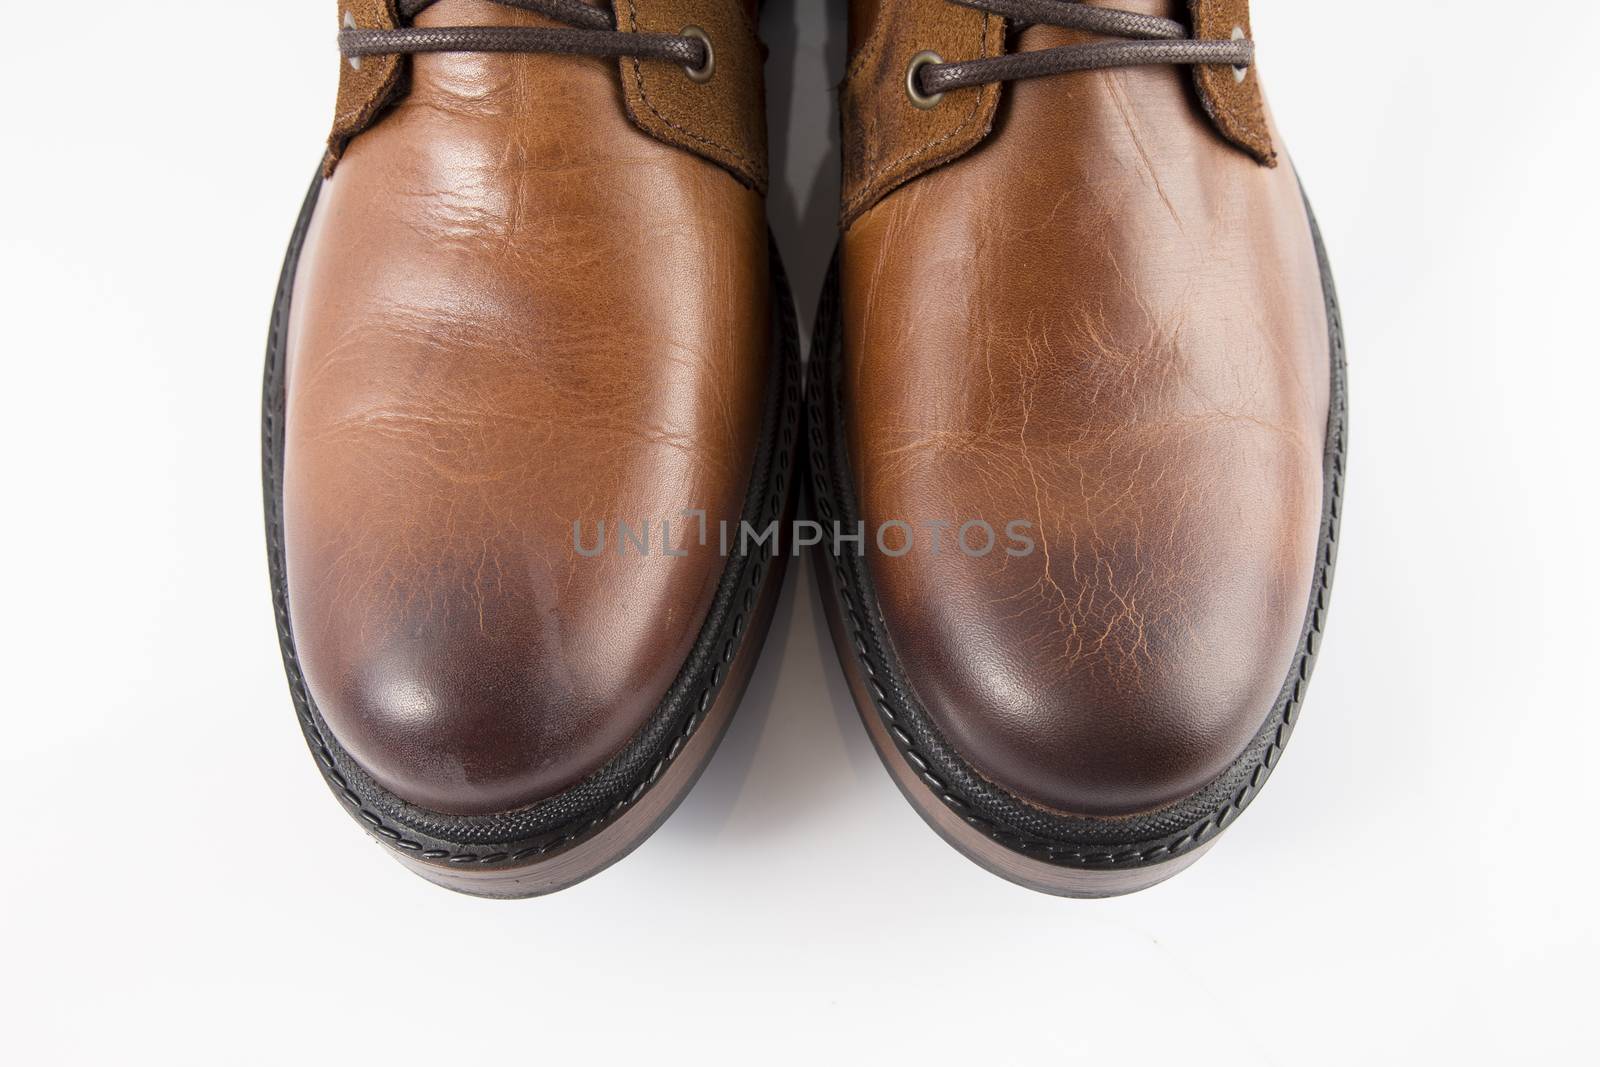 Pair of brown leather boots on white background, isolated product, top view.